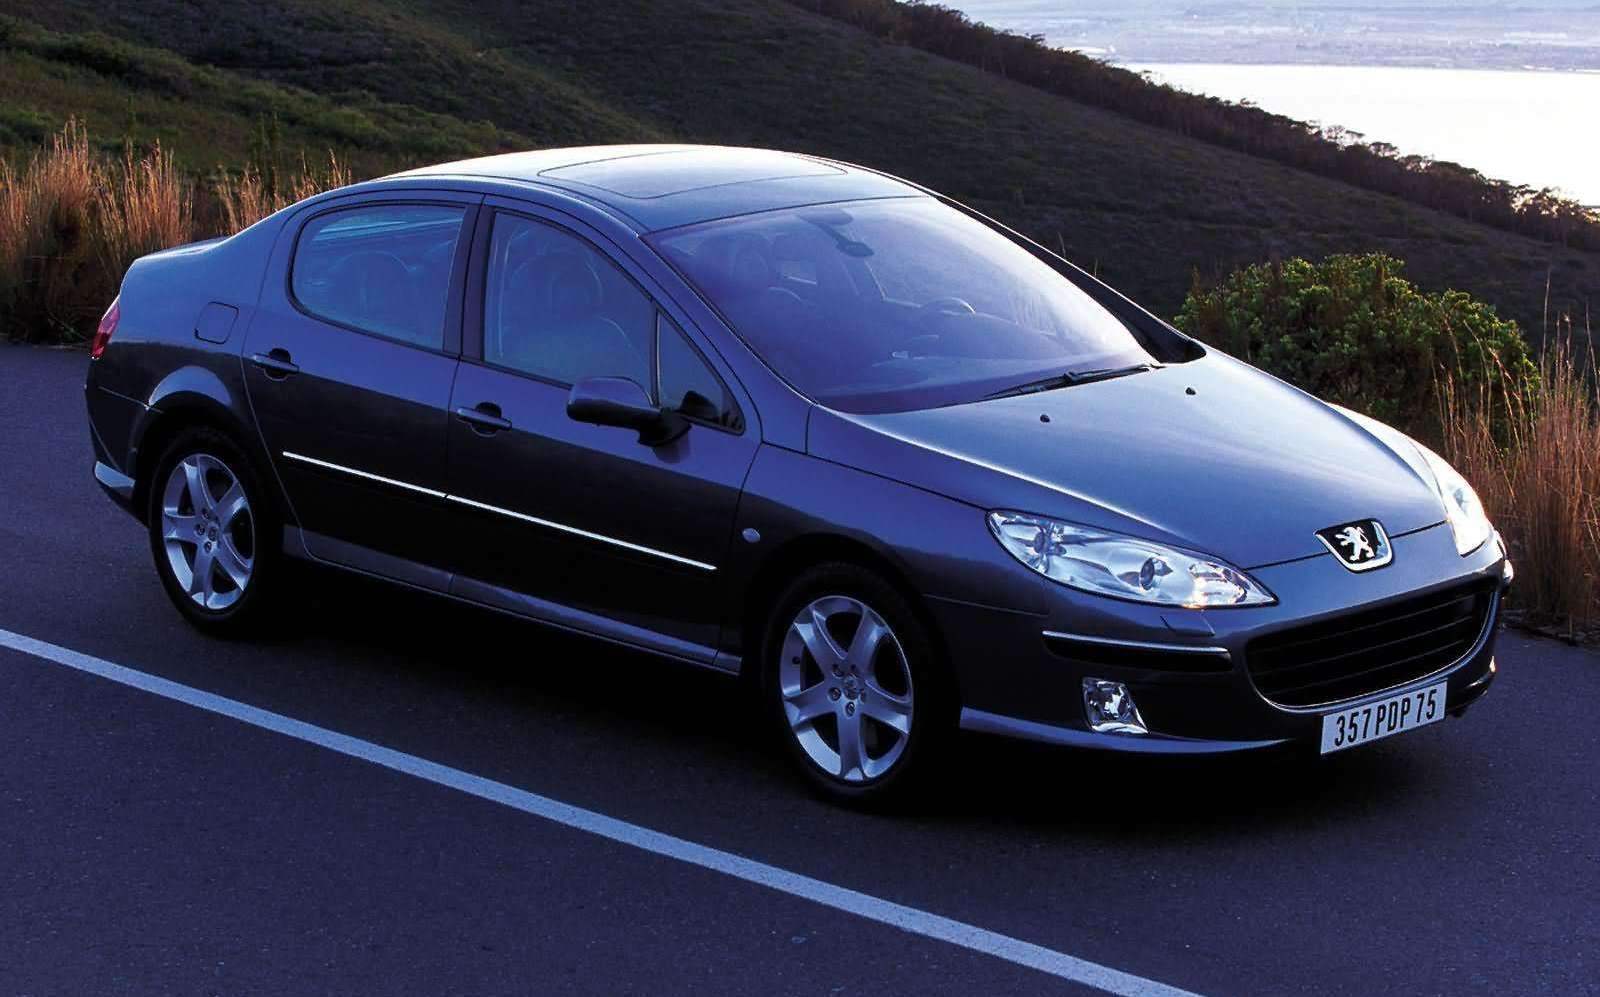 PEUGEOT 407 2004 — the most modern family car company Peugeot, produced in cooperation with the company Pininfarina